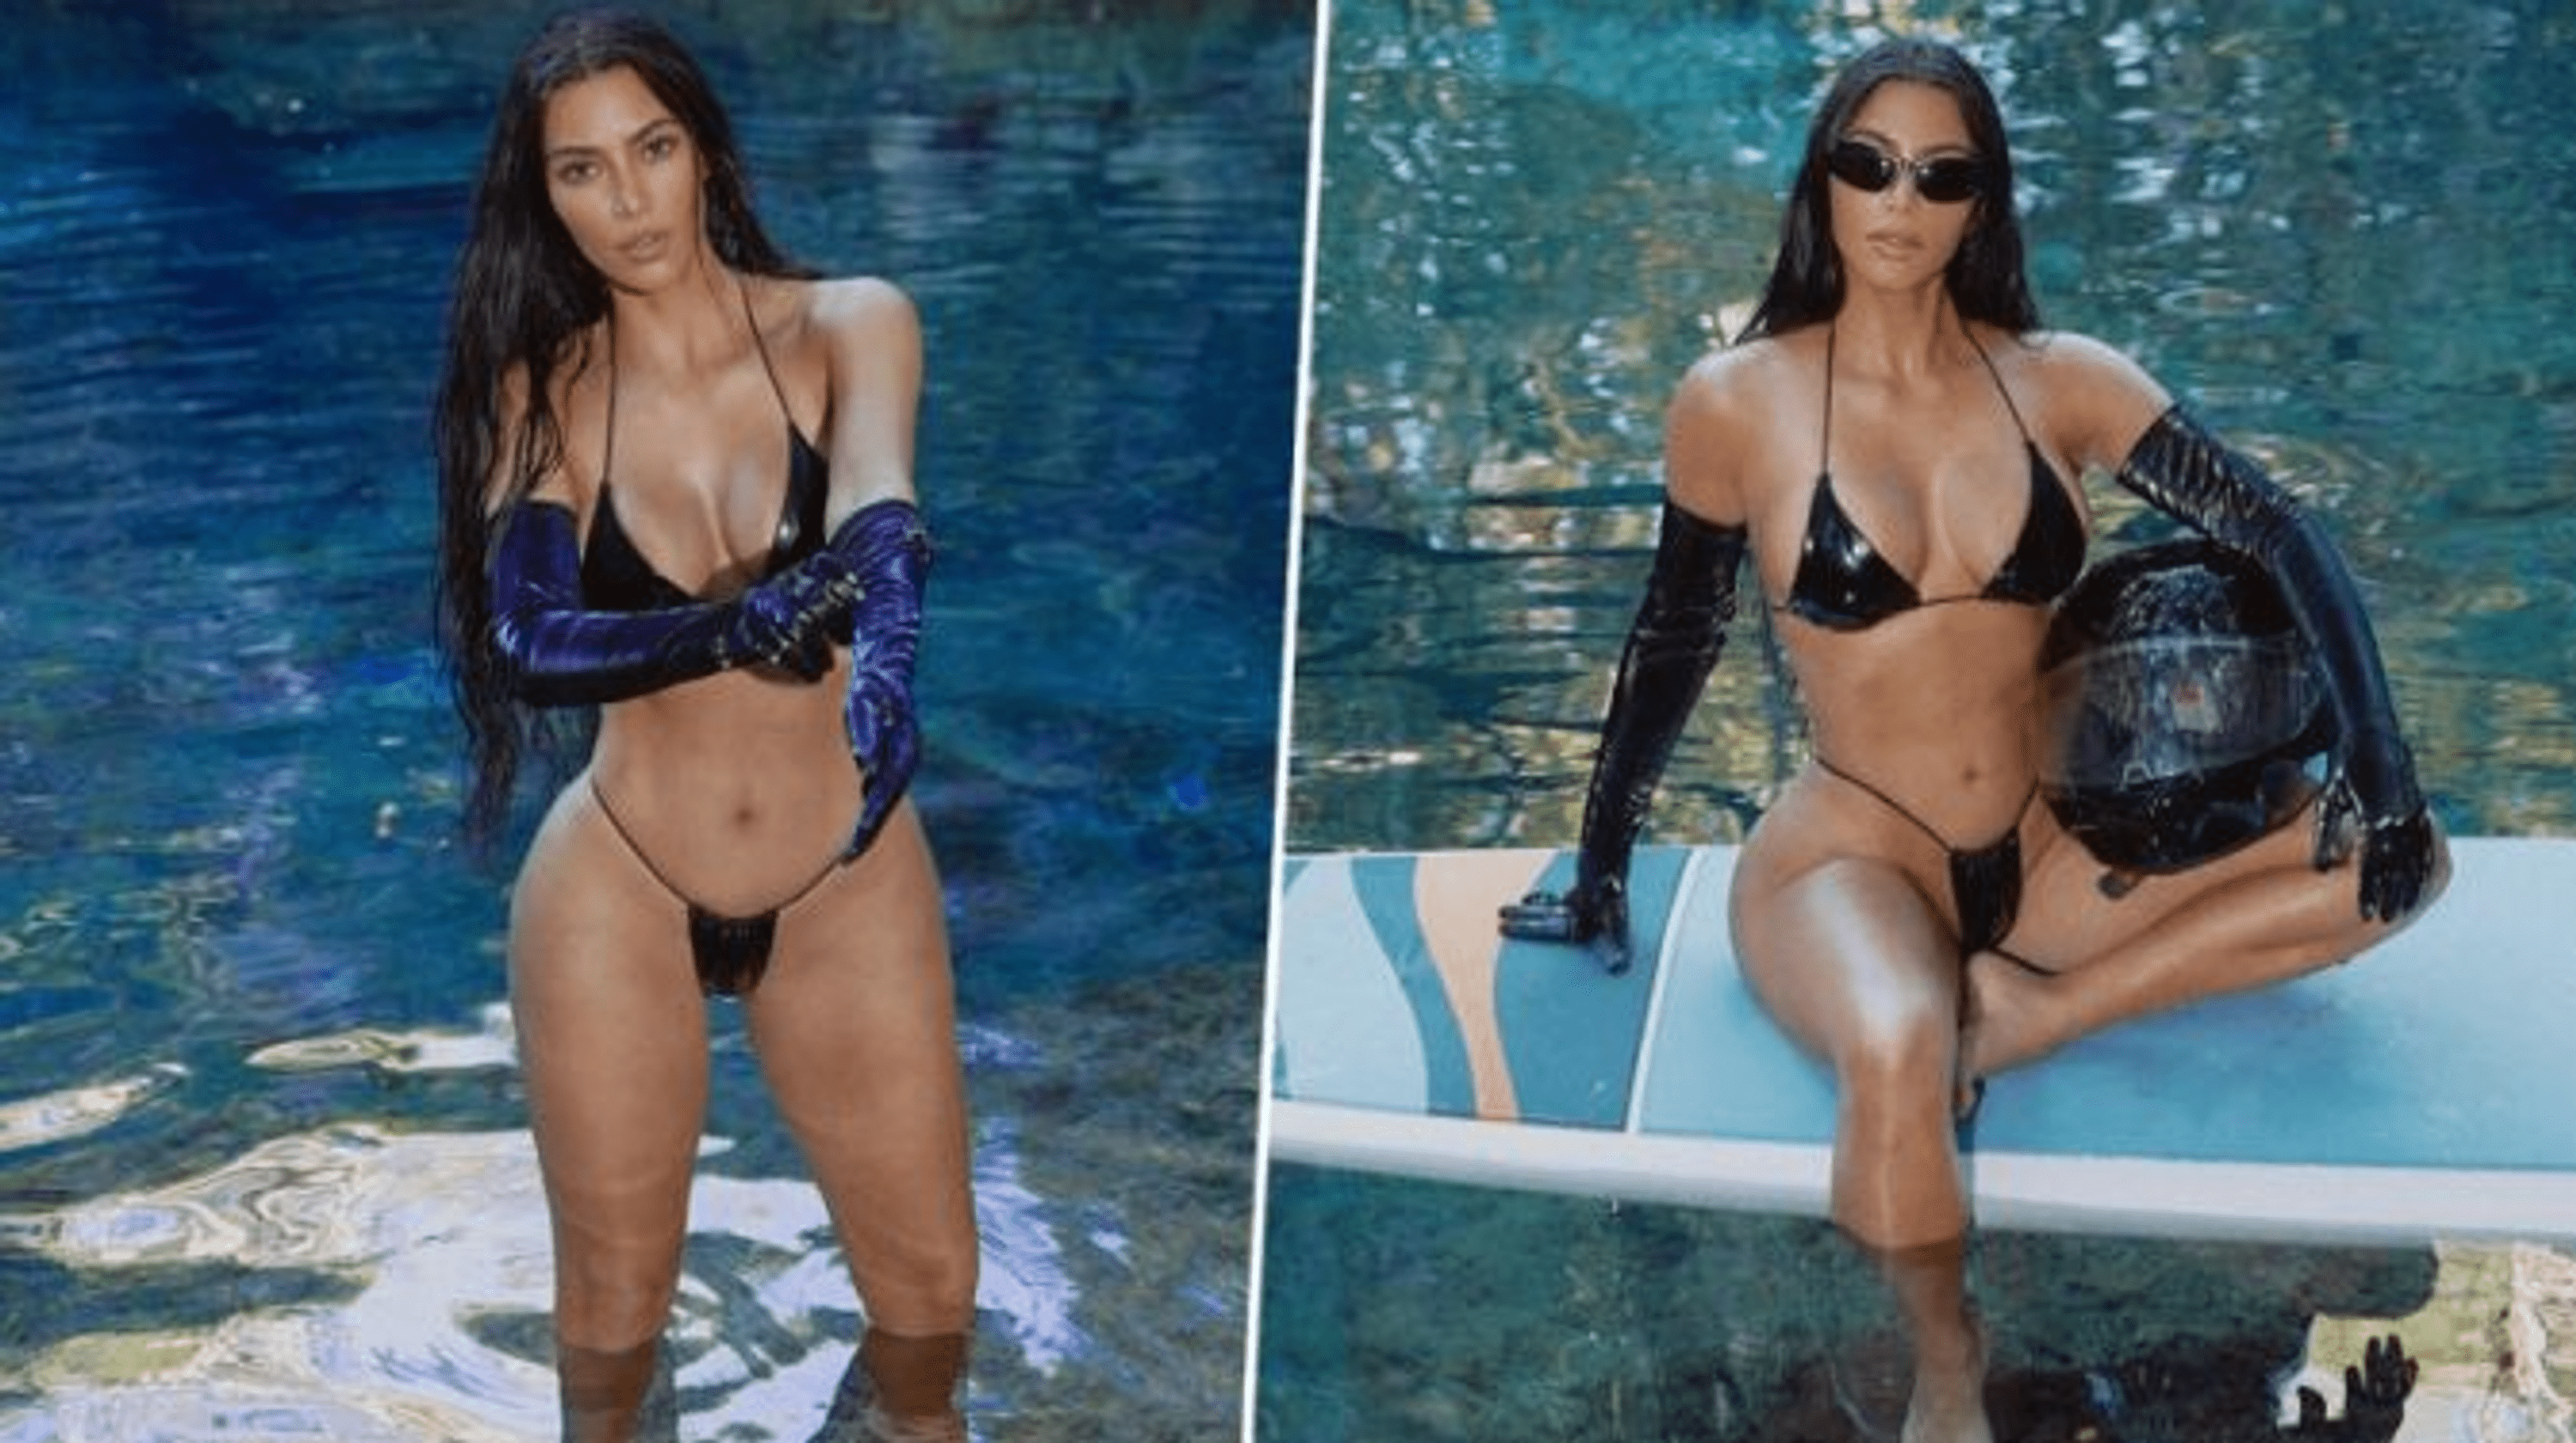 ”kim-kardashian-posed-in-a-bikini-for-the-cover-of-sports-illustrated-swimsuit”